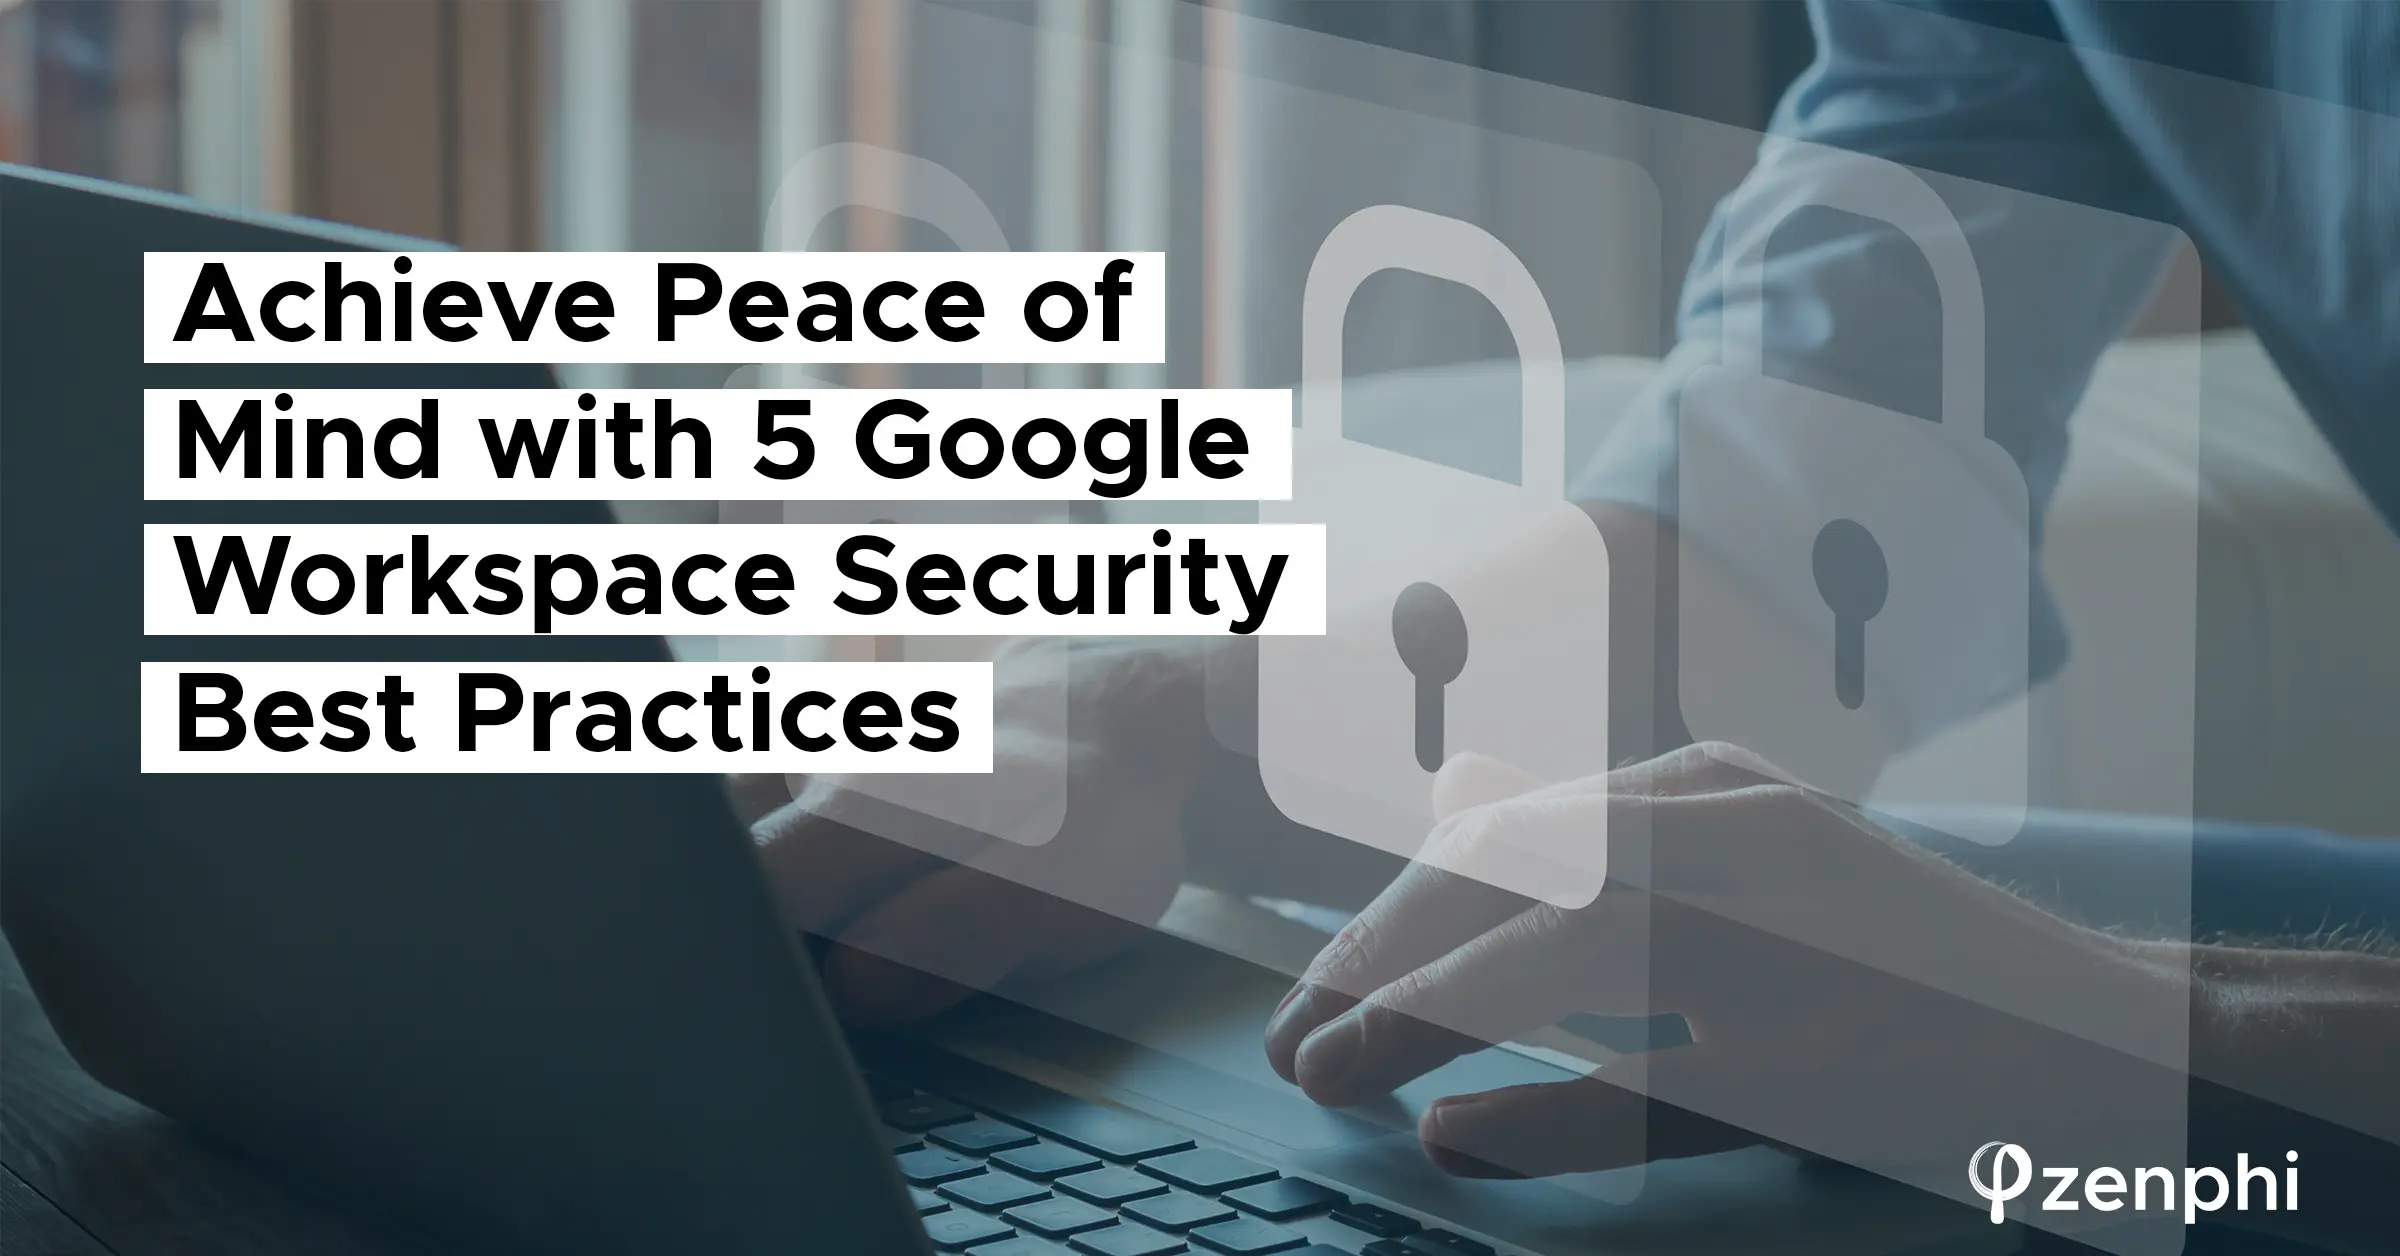 Achieve Peace of Mind with 5 Google Workspace Security Best Practices